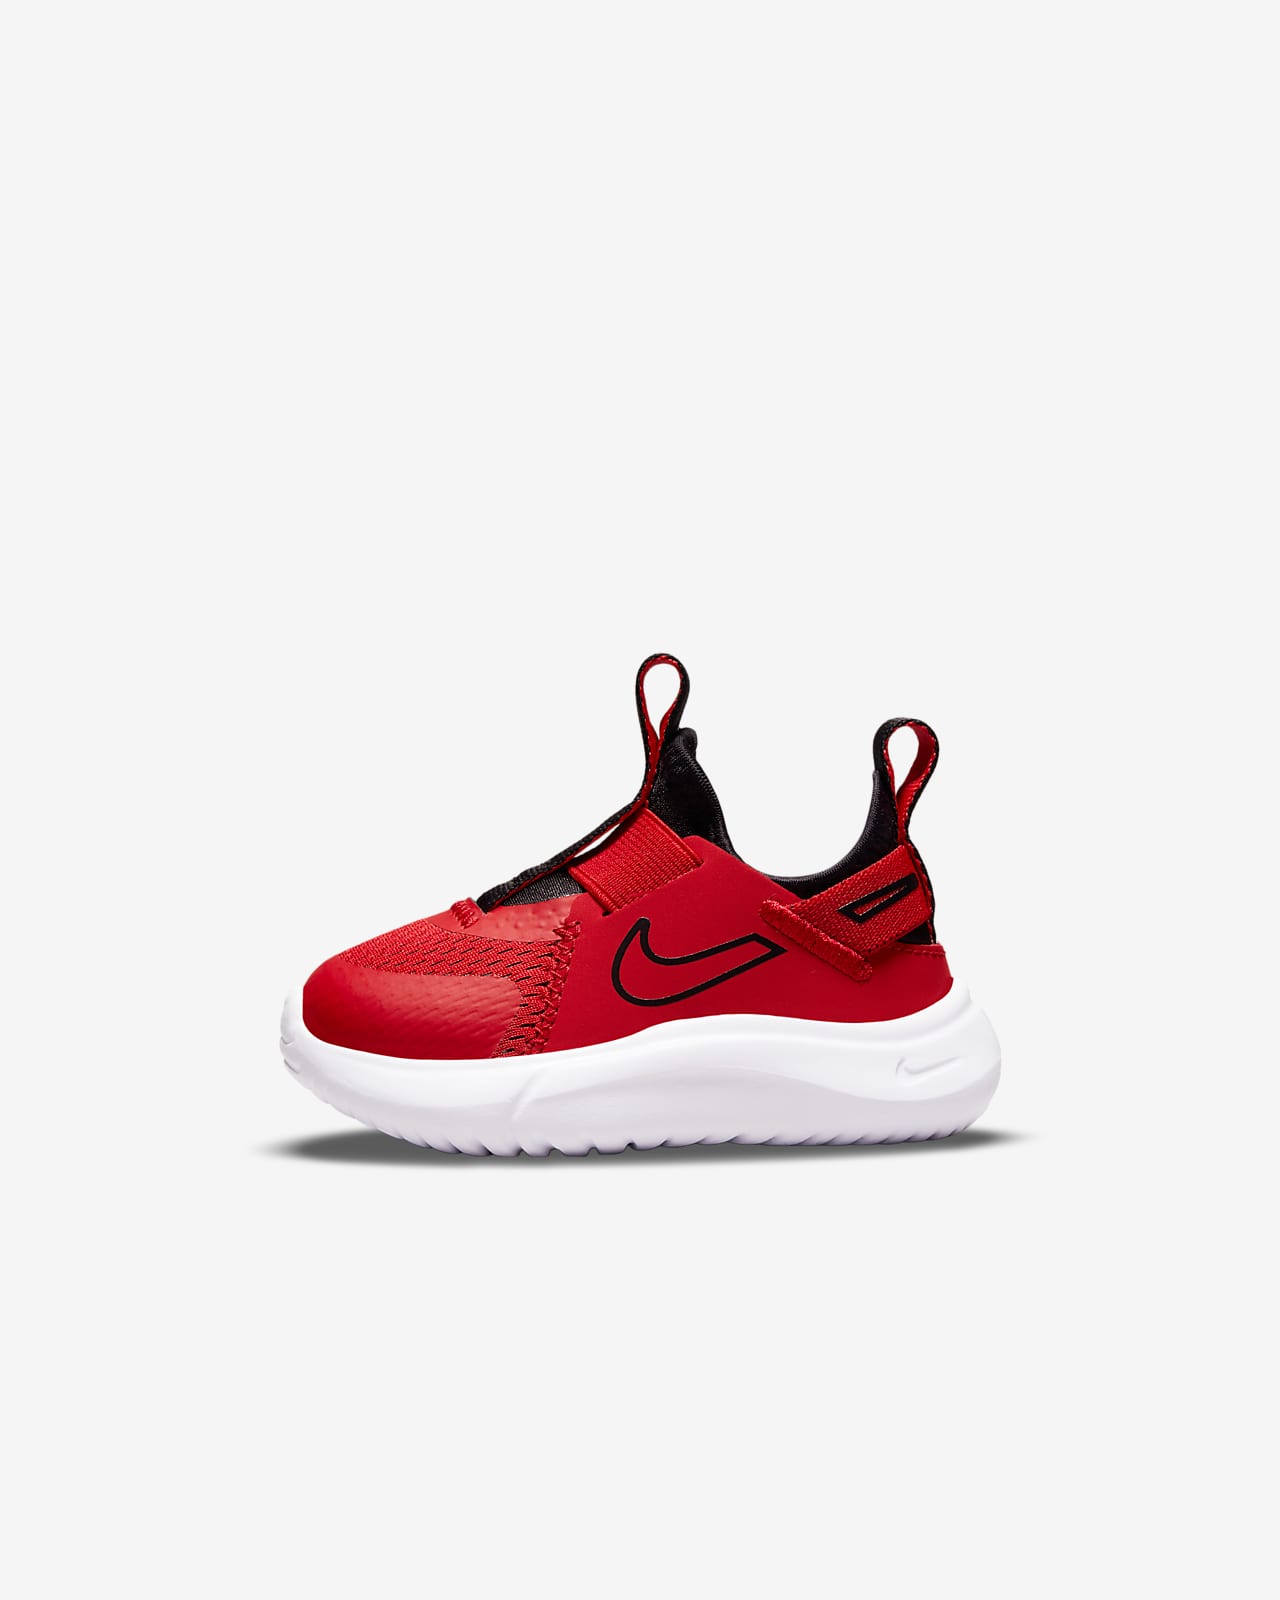 Ananiver sombrero objetivo qqqwjf.nike baby shoes online , Off 63%,dolphin-yachts.com